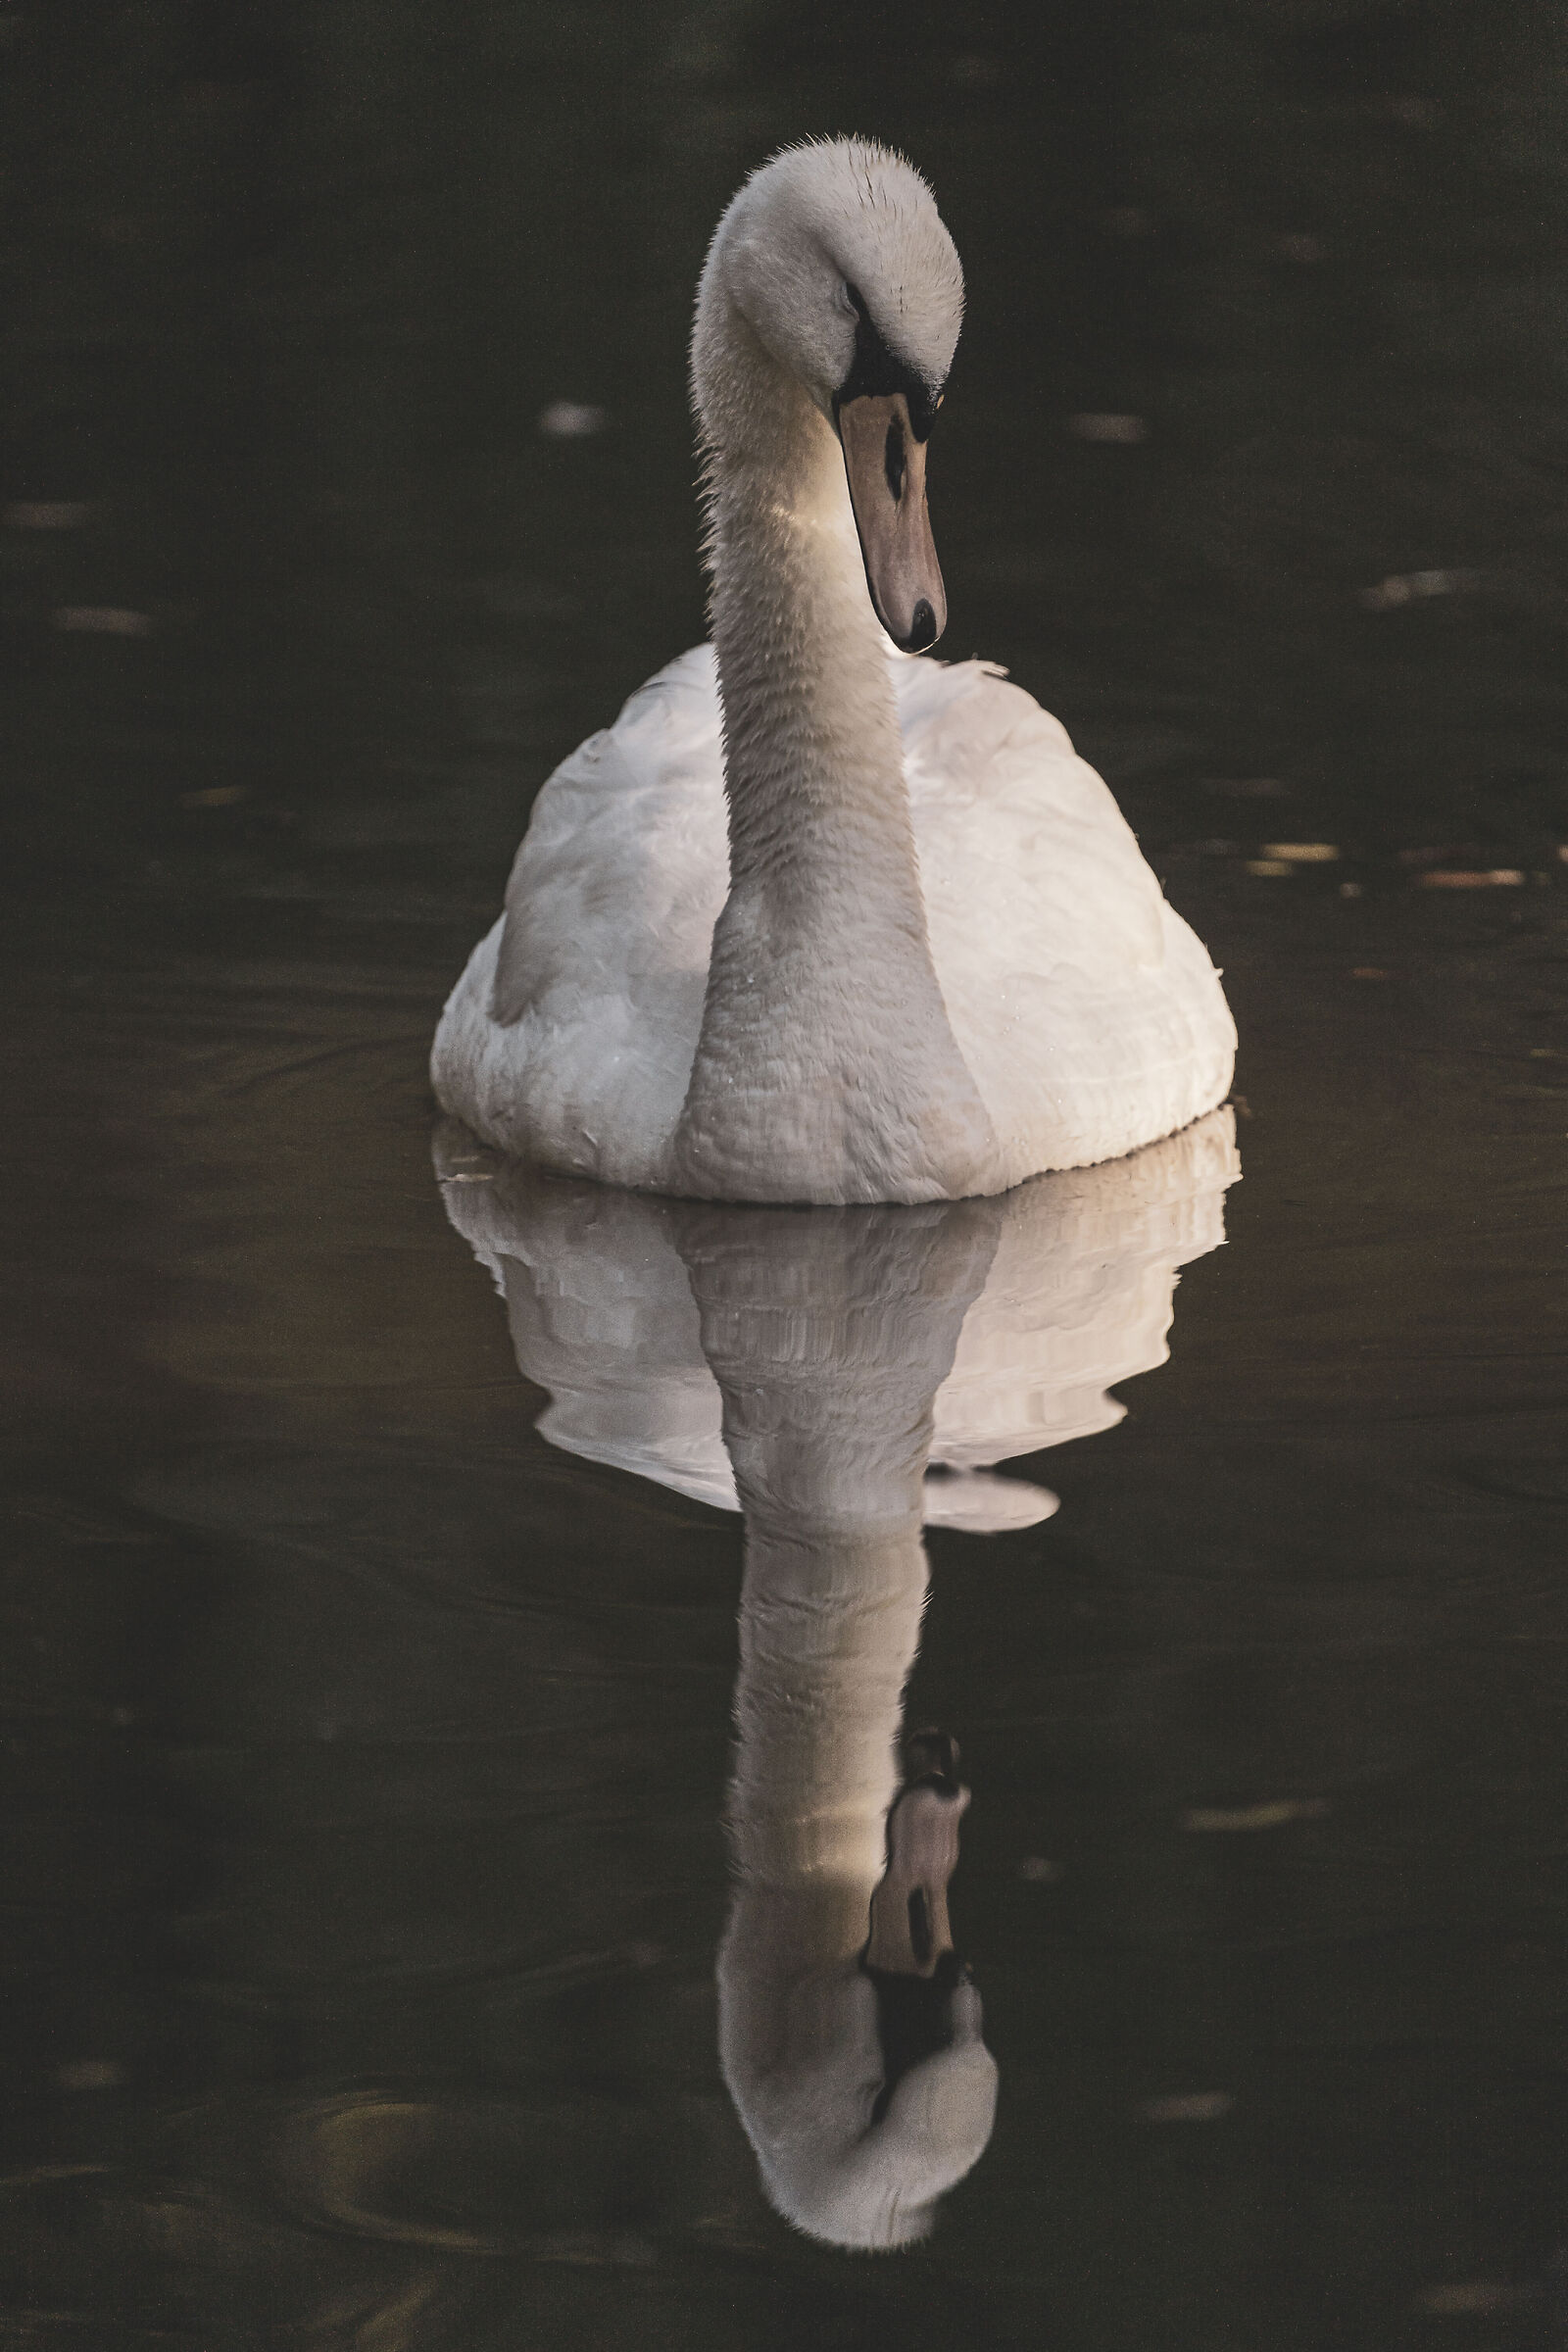 The majesty of the swan ...